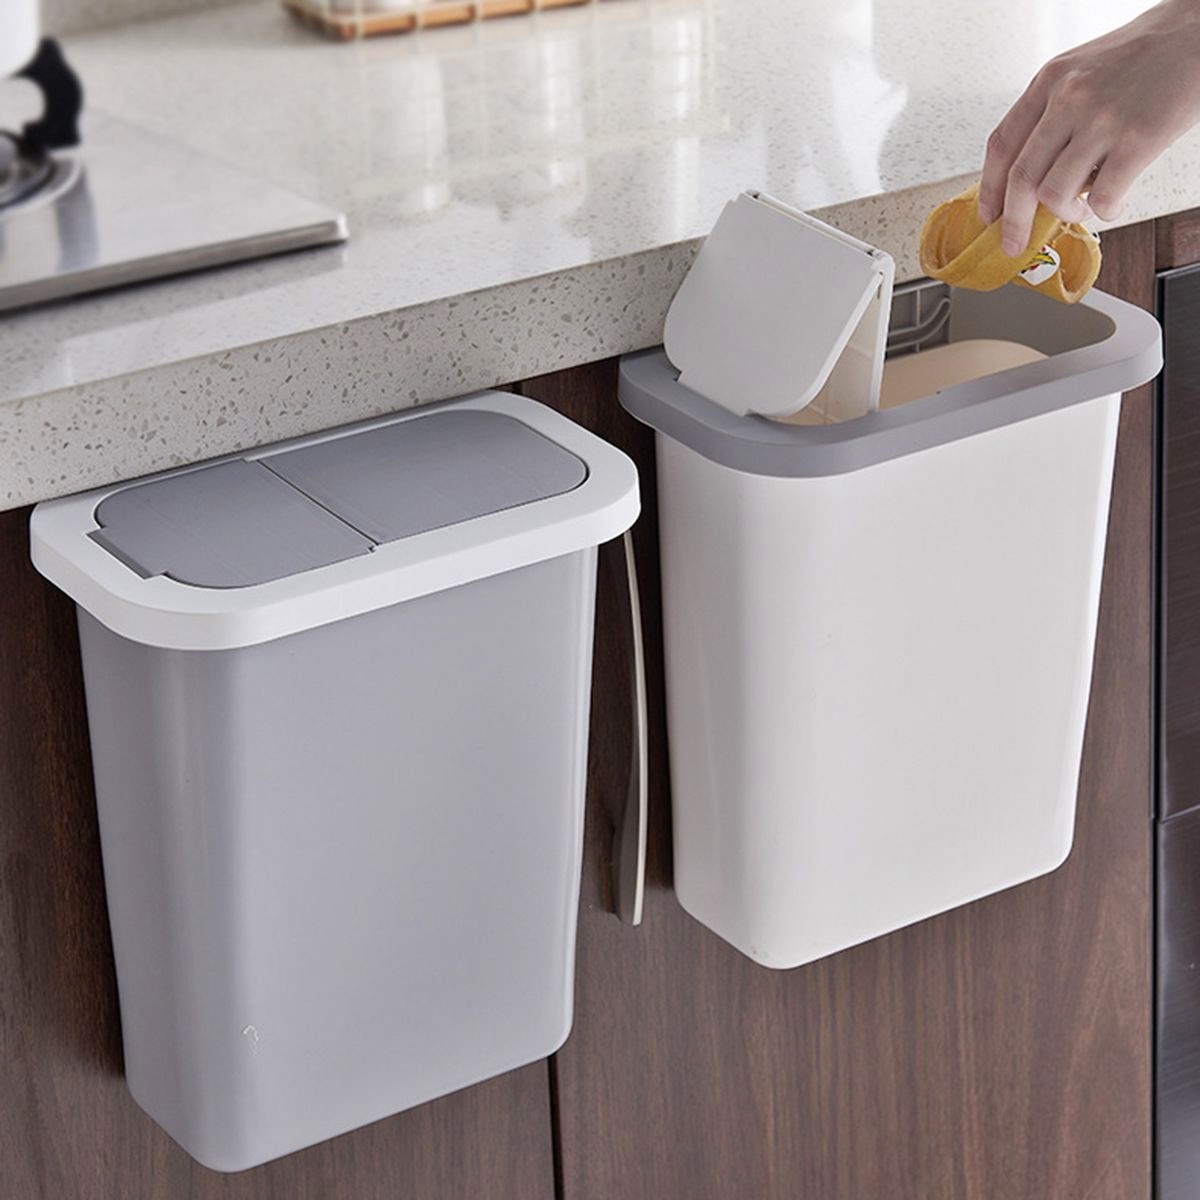 what-size-of-trash-can-fits-under-sink